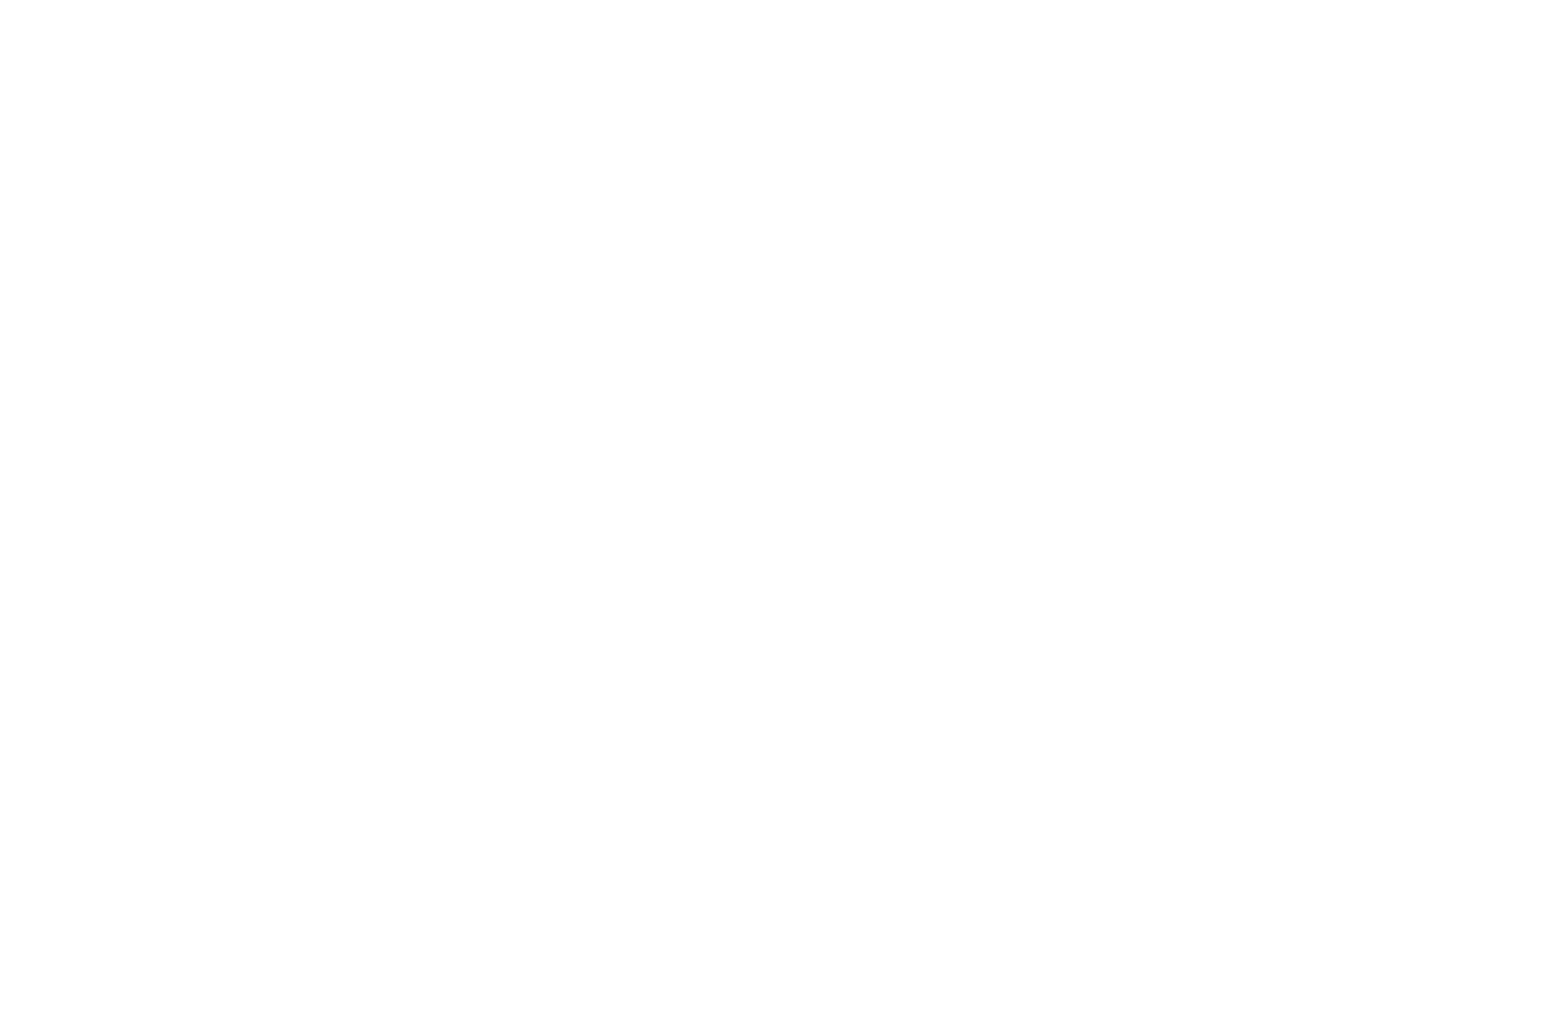 Holt Environments – Interior, Event, and Virtual Design-Build Agency